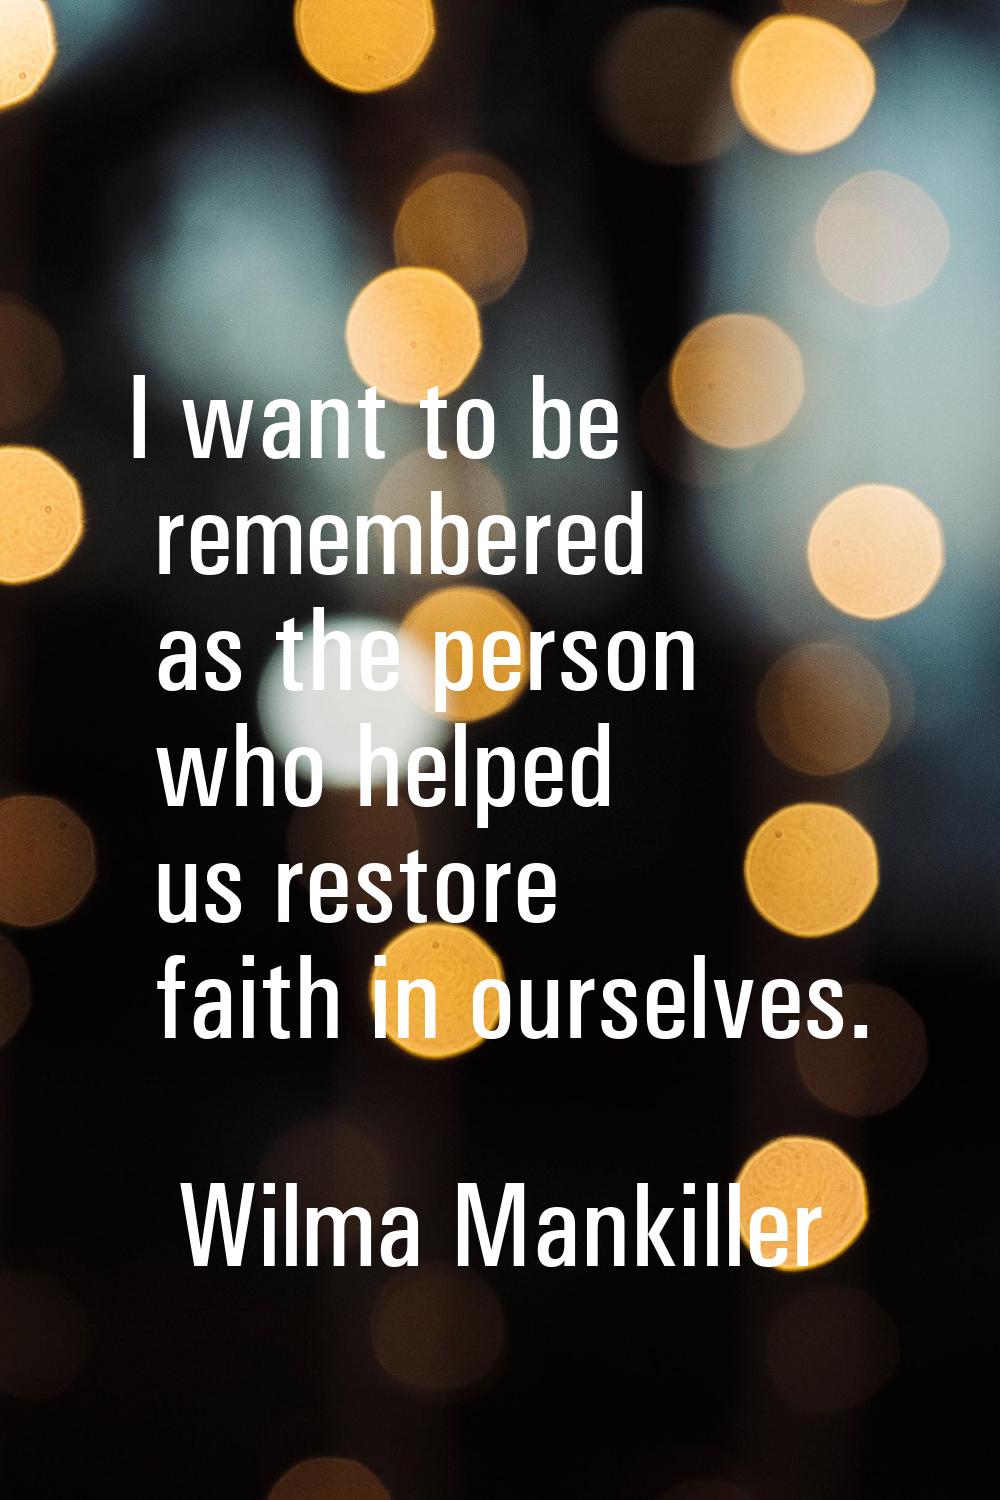 I want to be remembered as the person who helped us restore faith in ourselves.